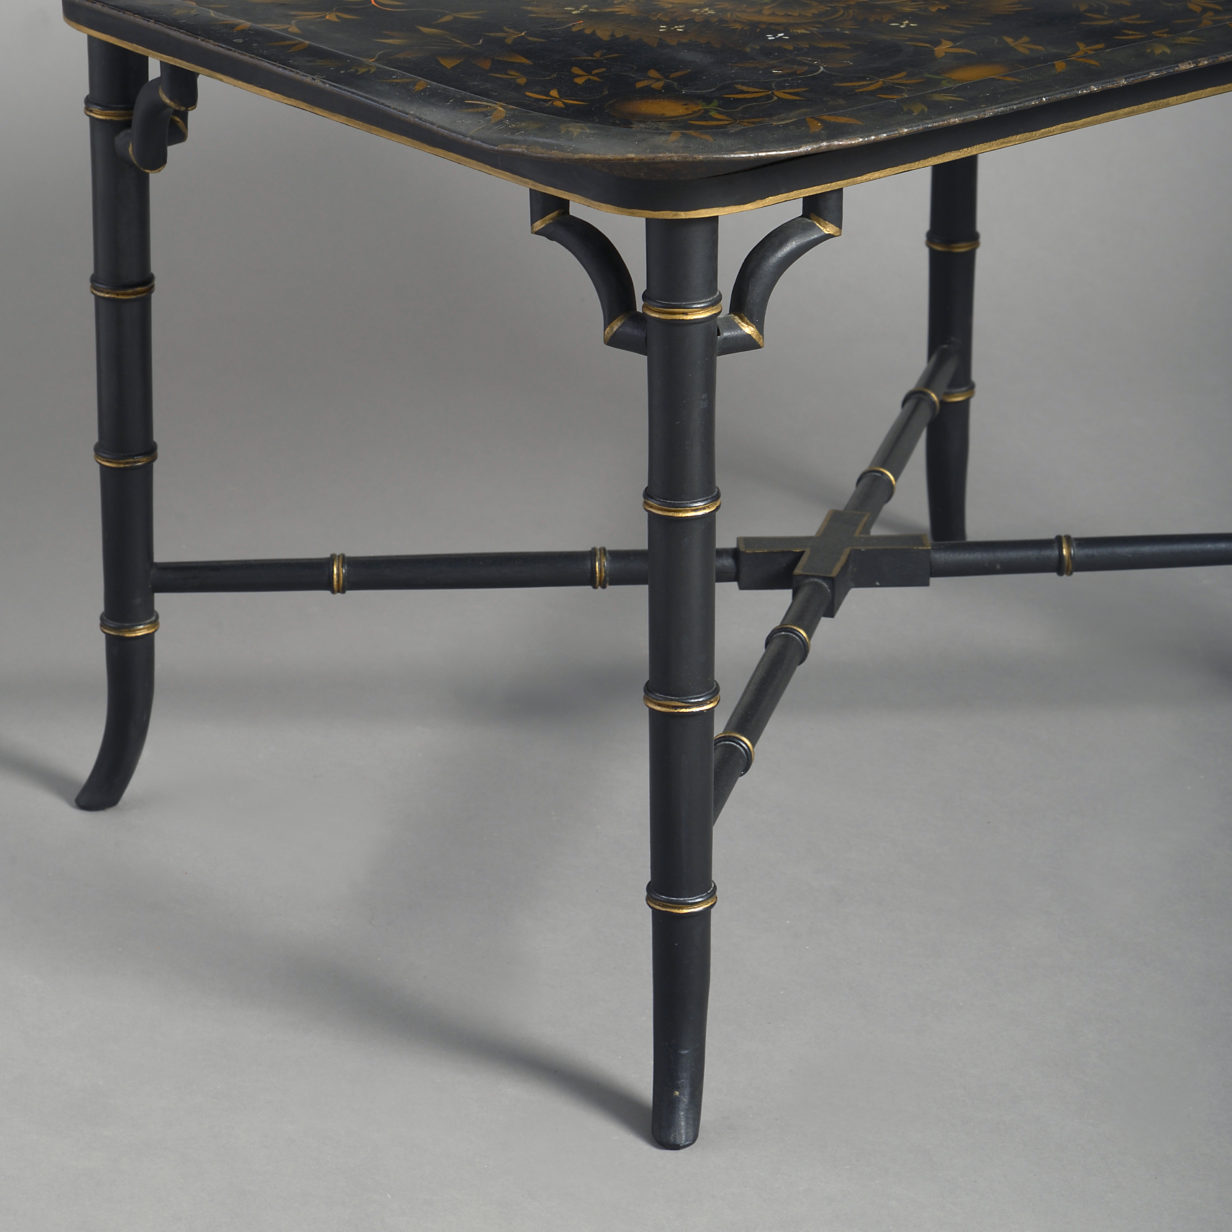 Early 19th Century Regency Period Tole Tray Table